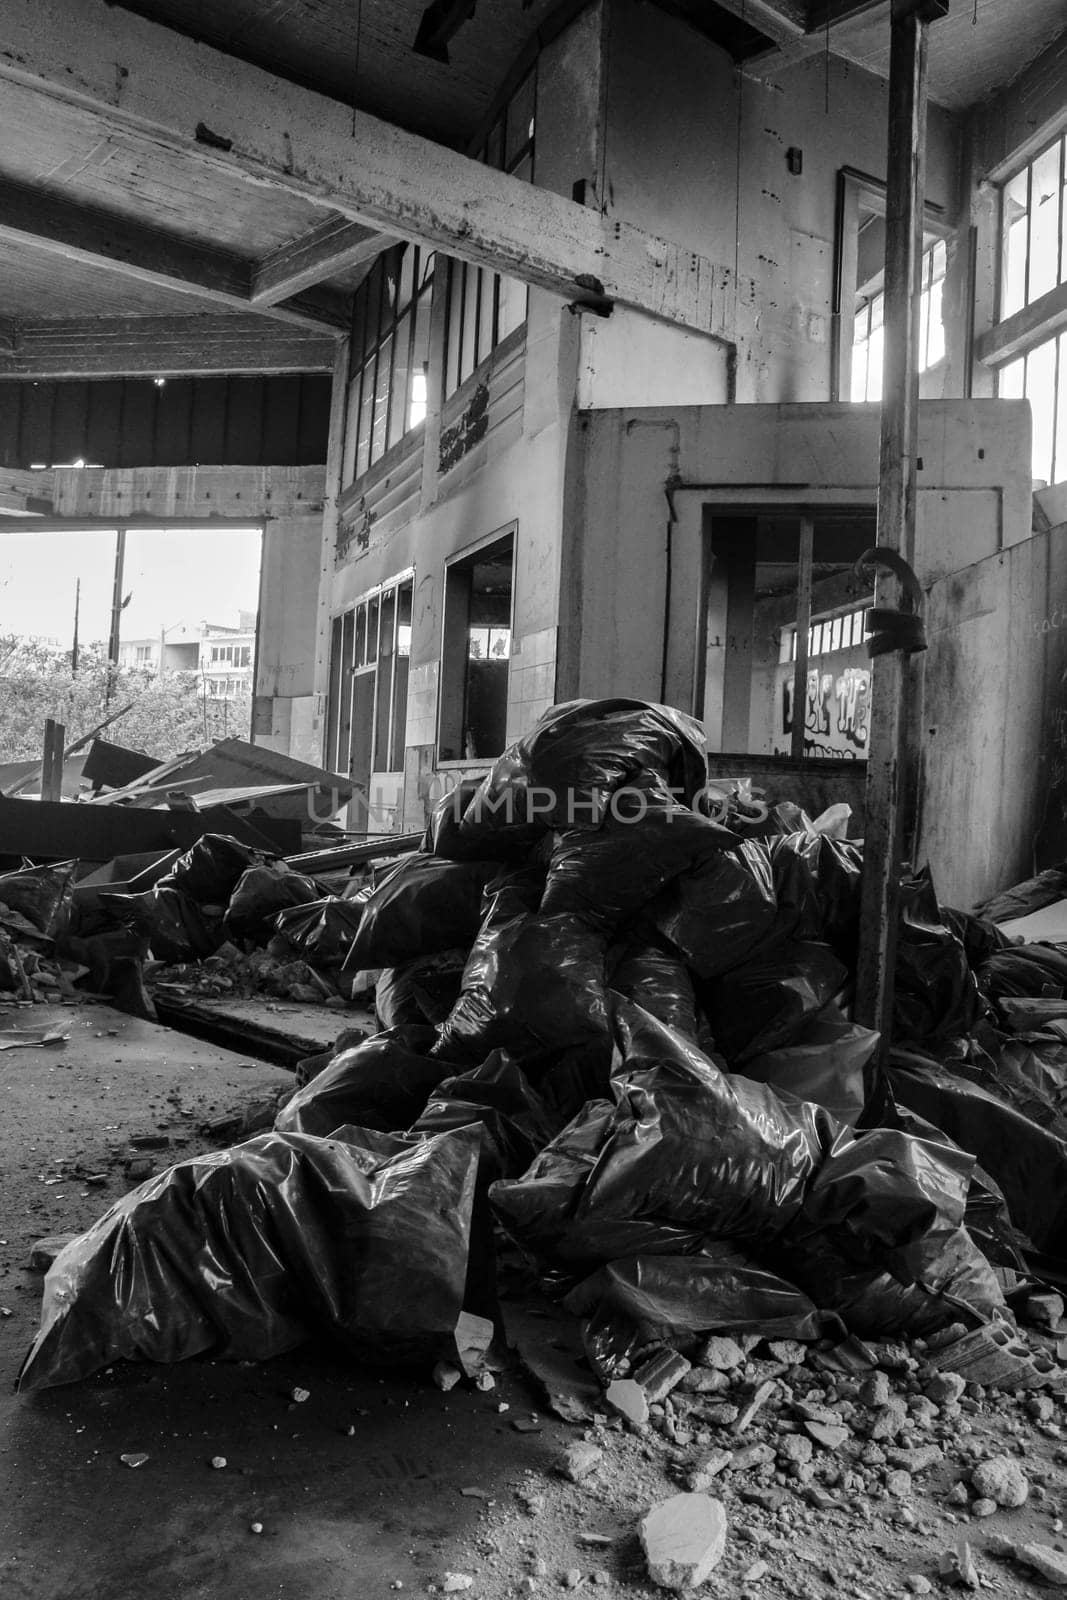 Peer into the gritty underbelly of urban life with this arresting image capturing piles of trash bags amidst the desolation of abandoned city streets.